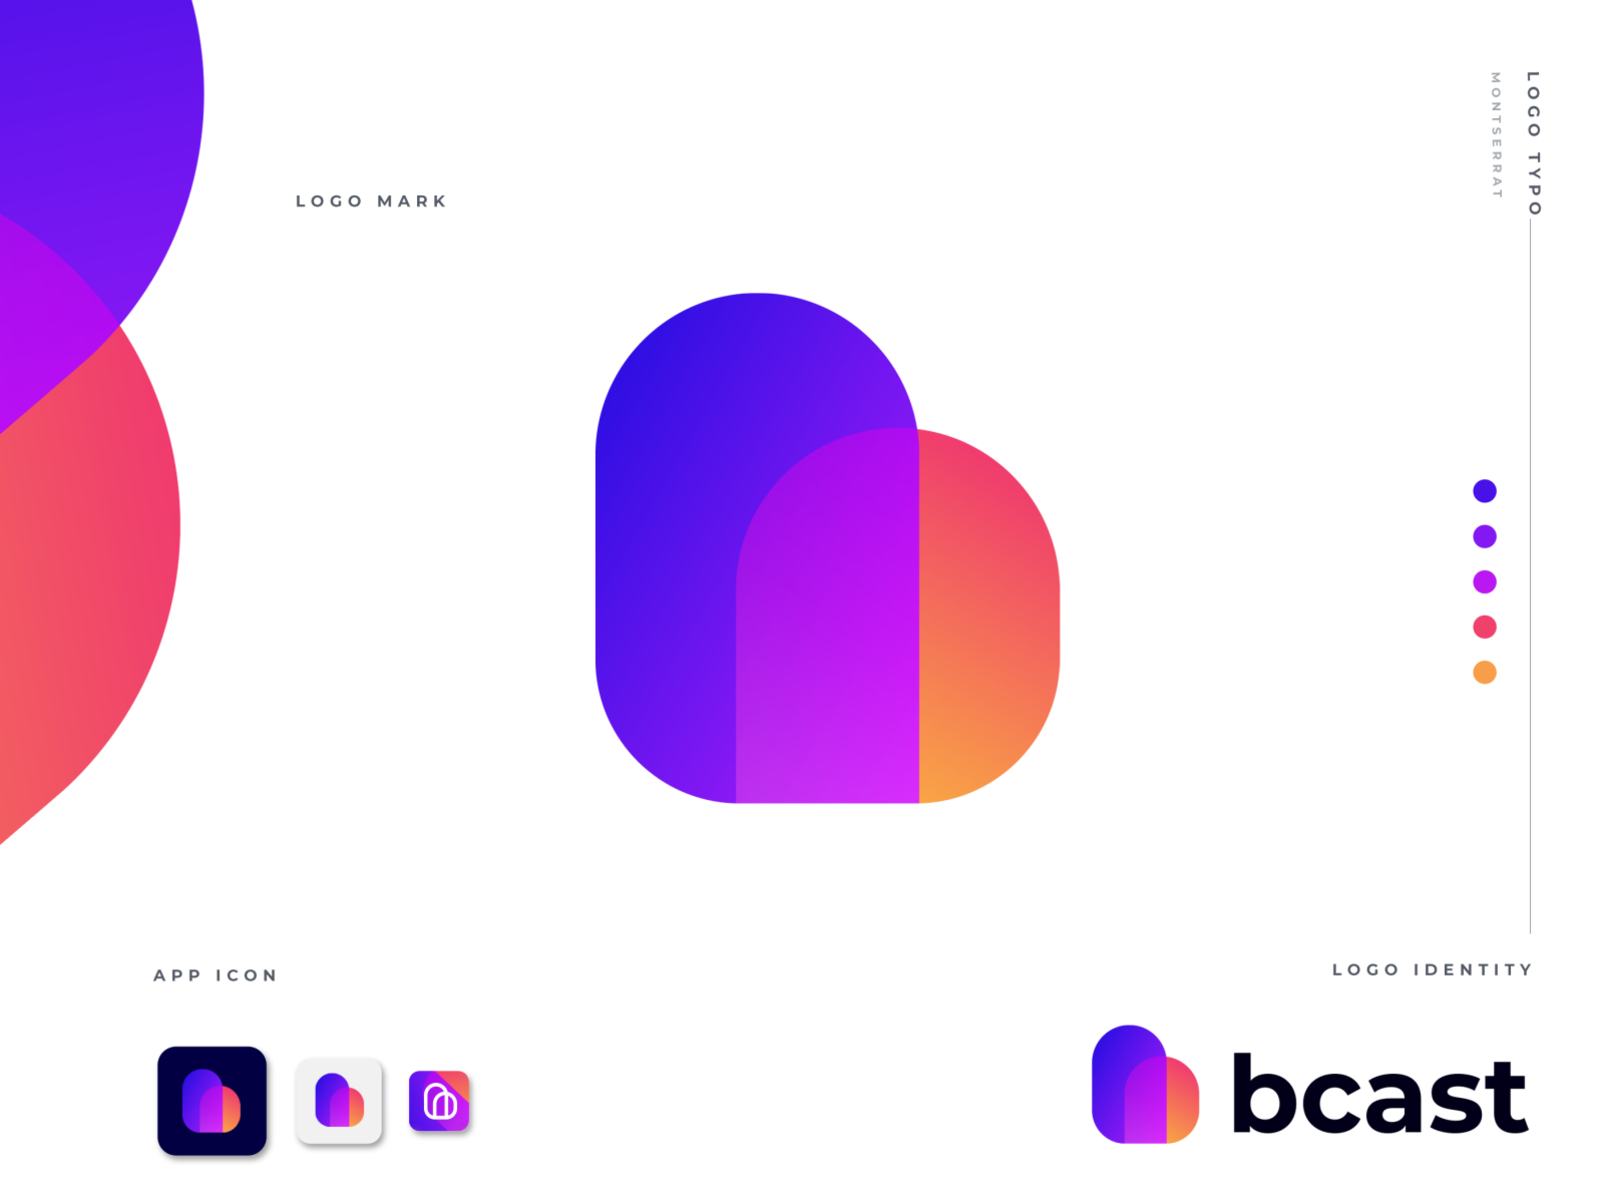 bcast logo design by Md Rasel on Dribbble